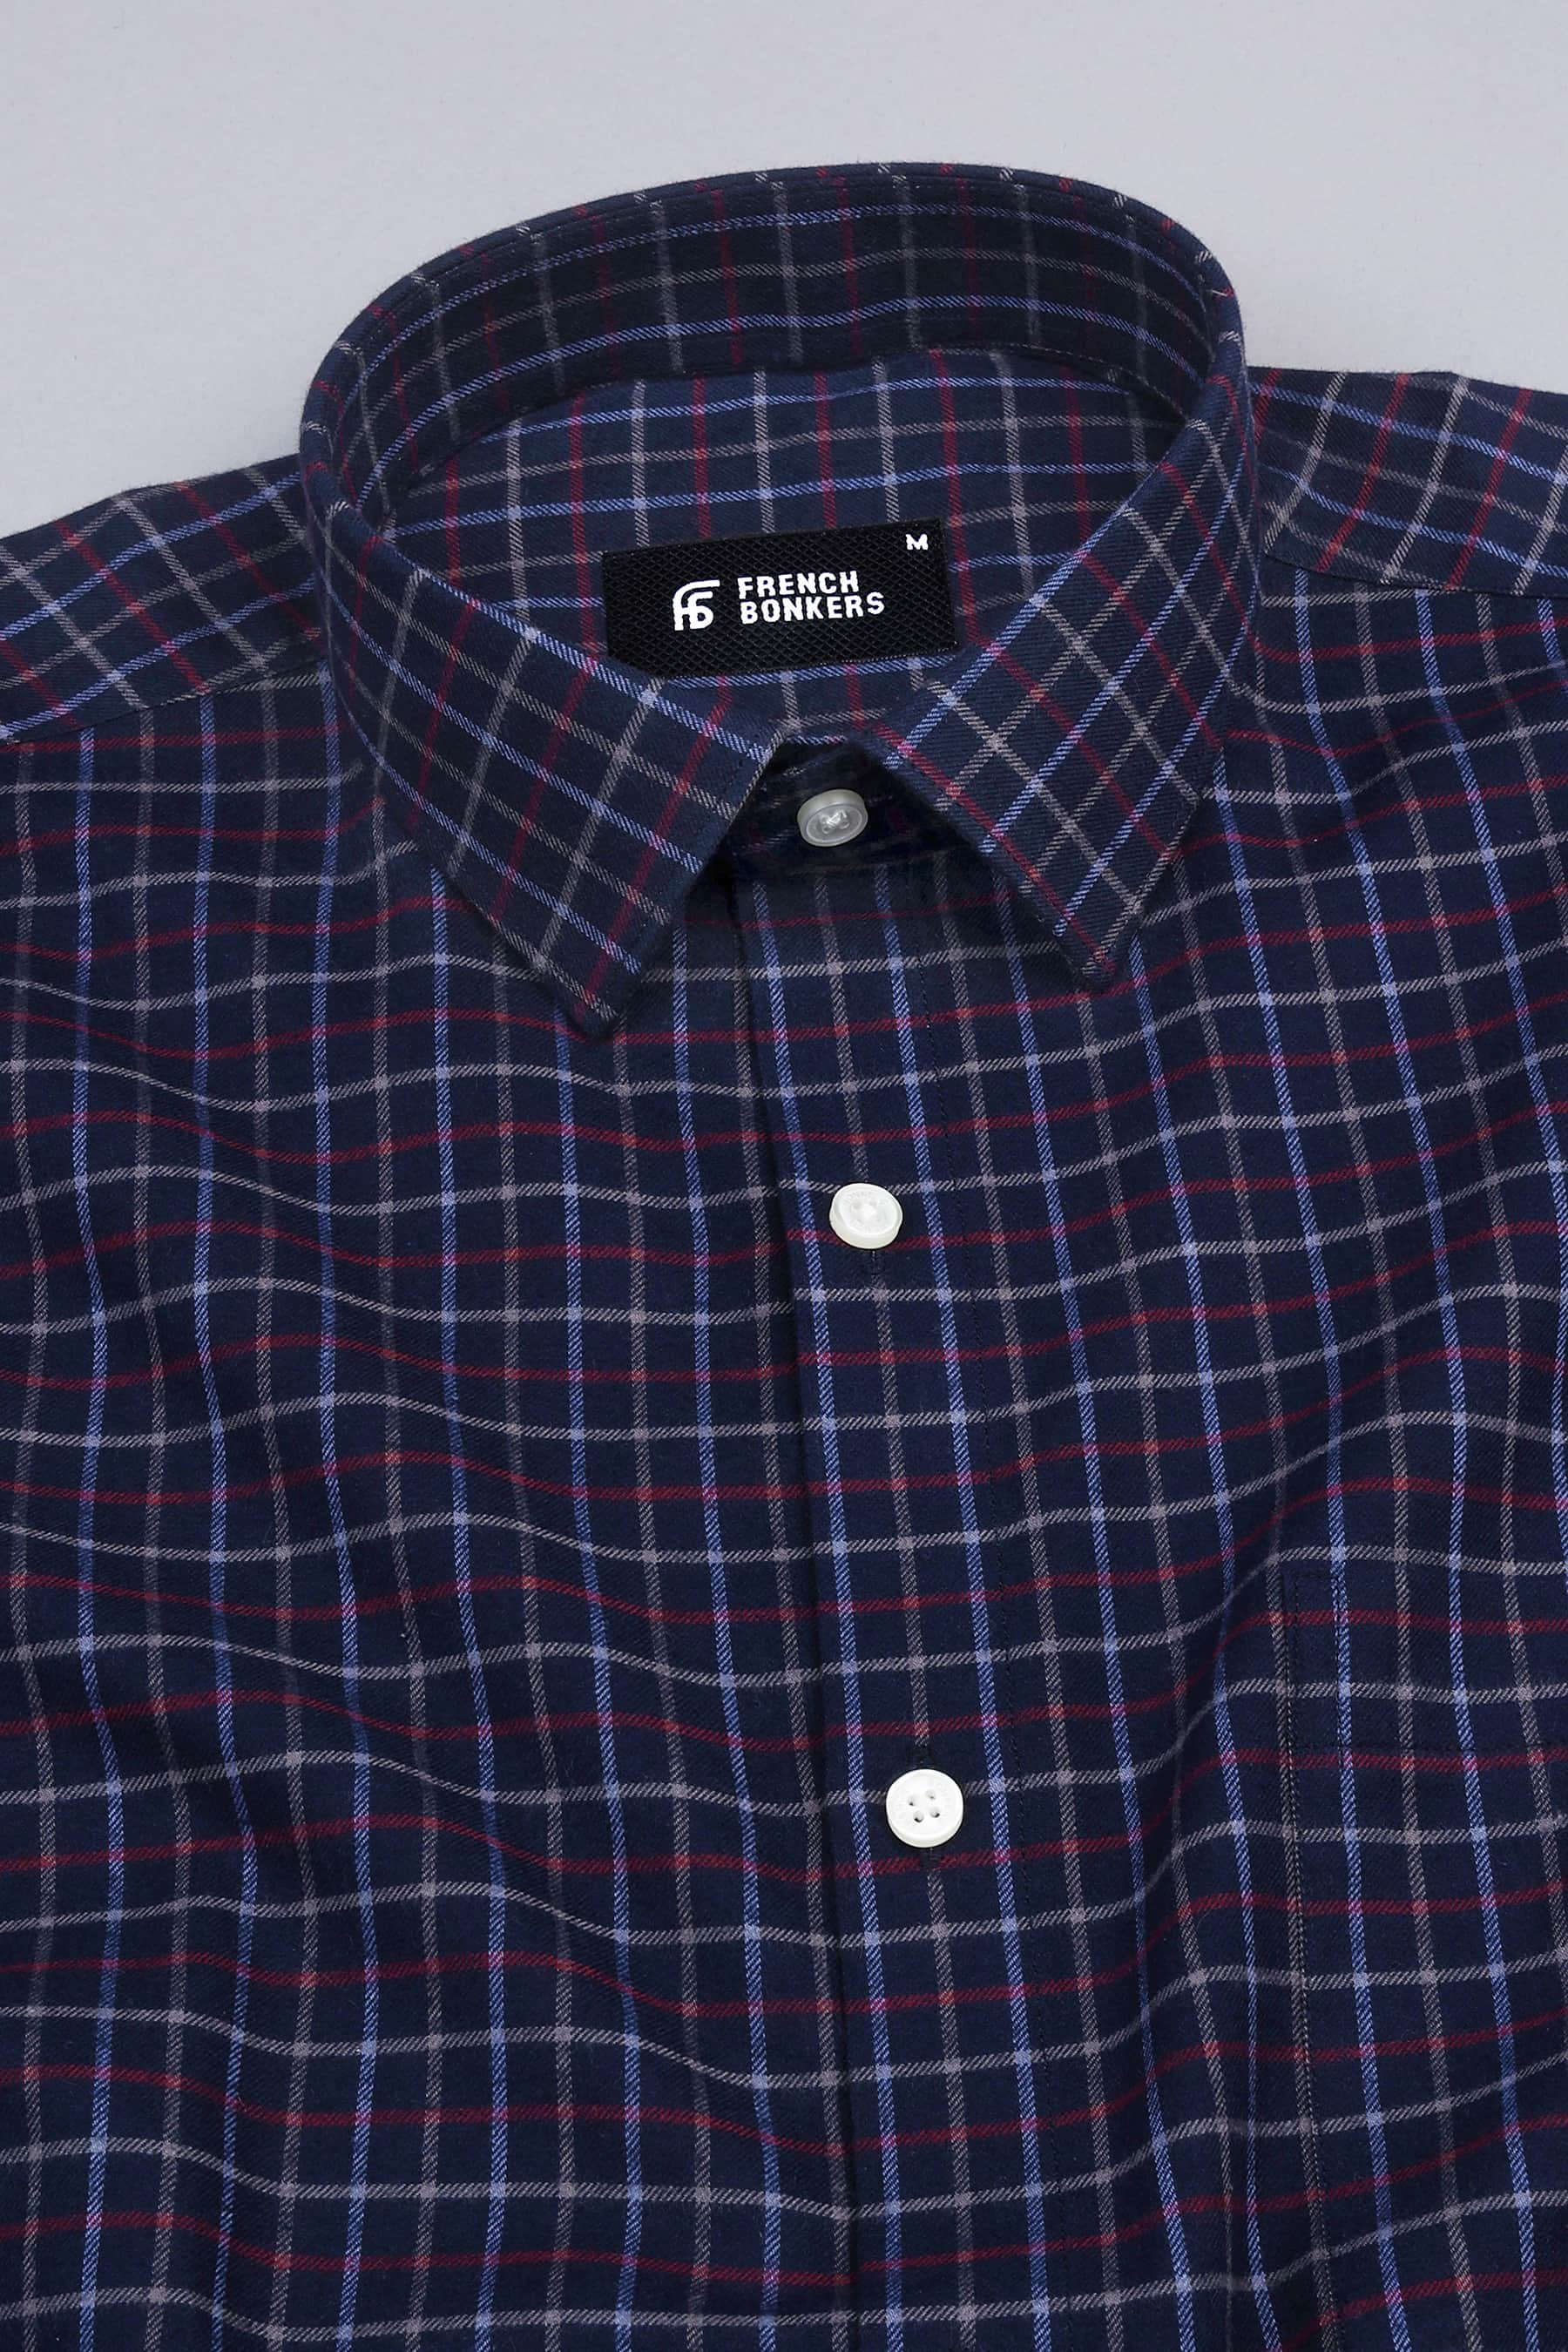 Dark blue with red and grey line tattershall check shirt